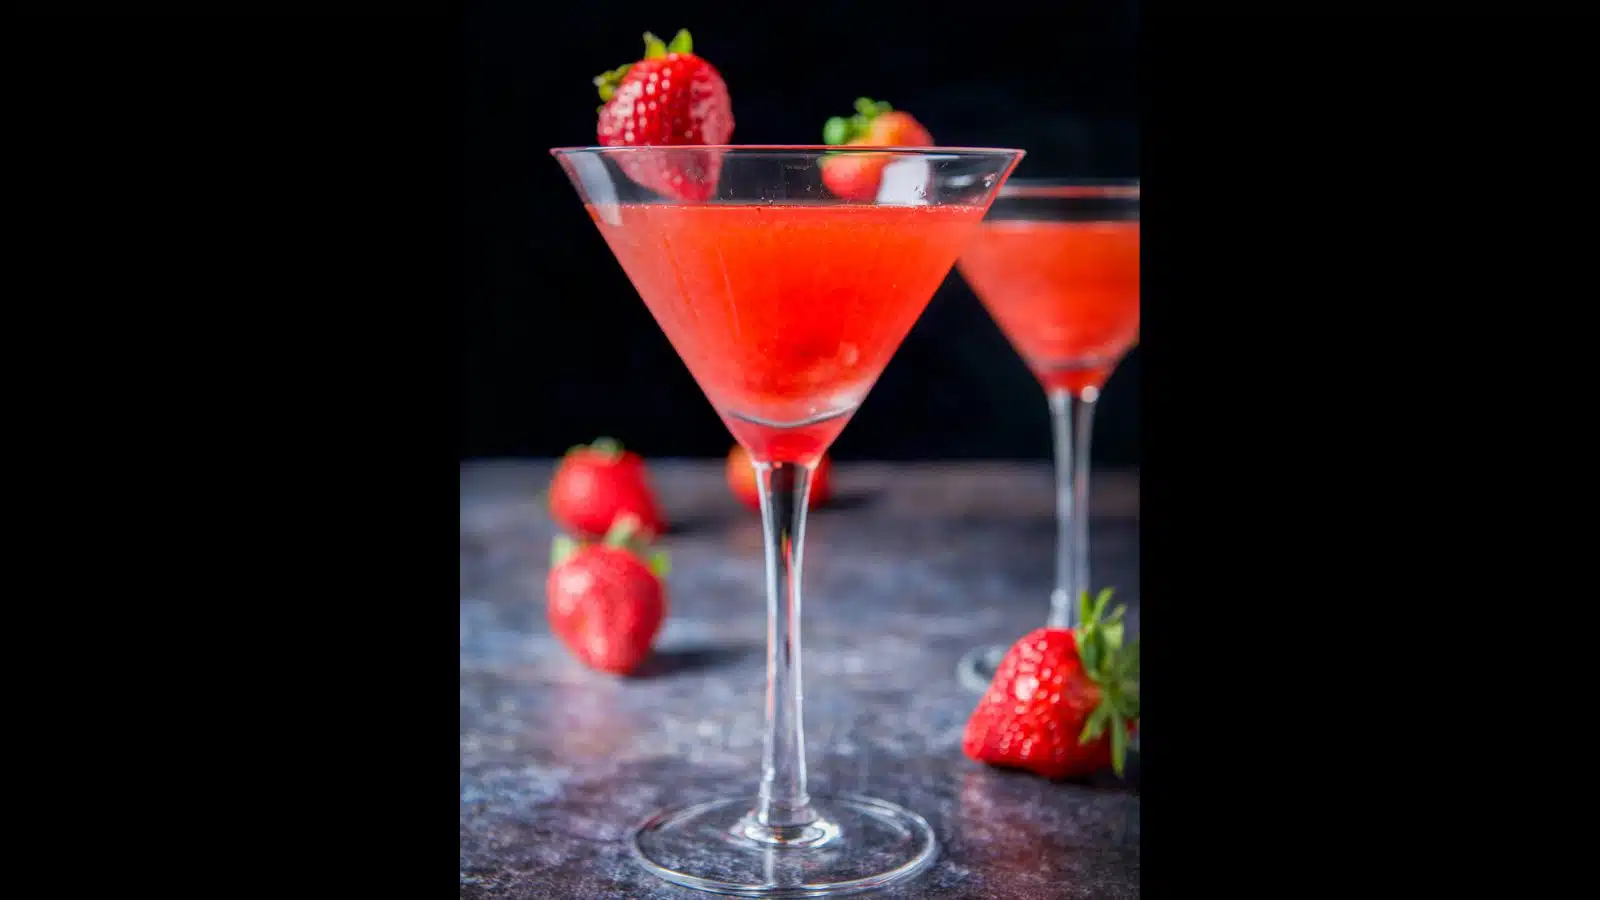 Two martini glasses filled with the strawberry drink with strawberries as garnish